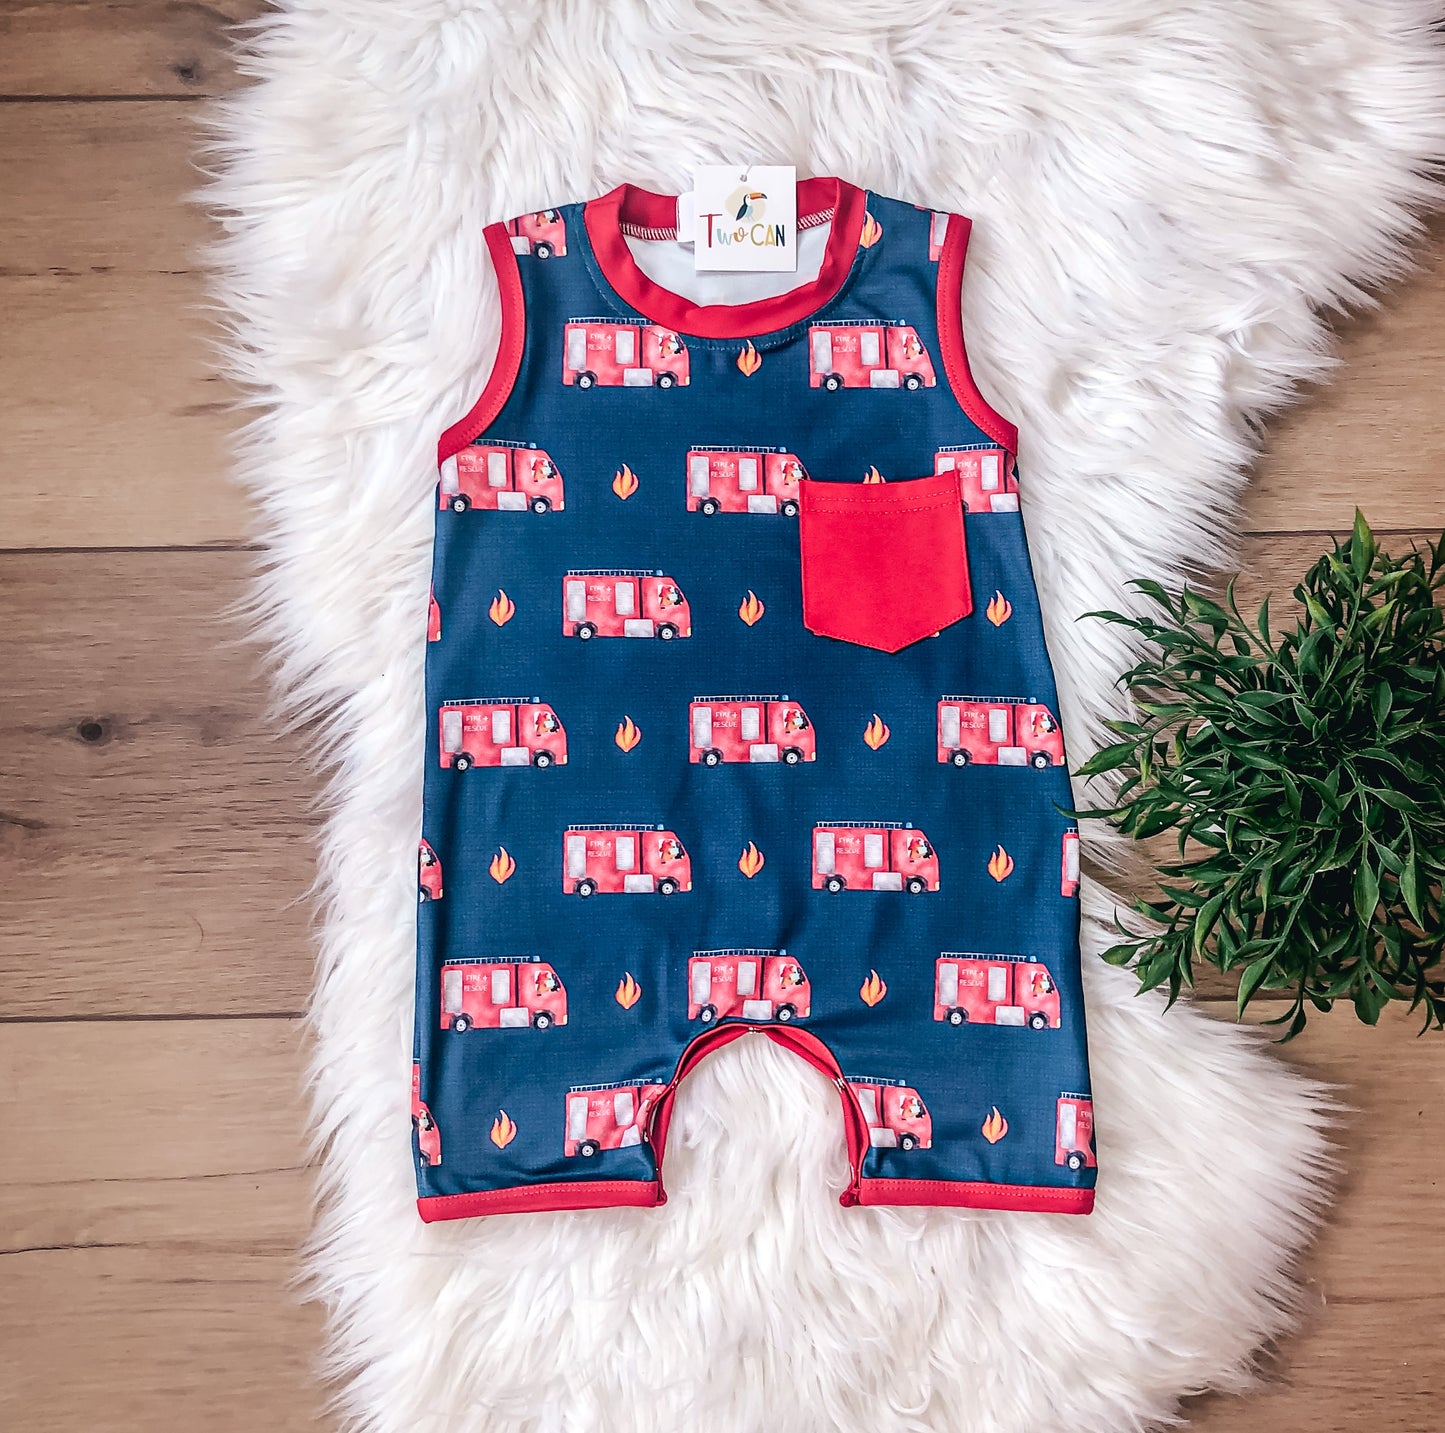 Sound the Alarm Boys Infant Romper by TwoCan